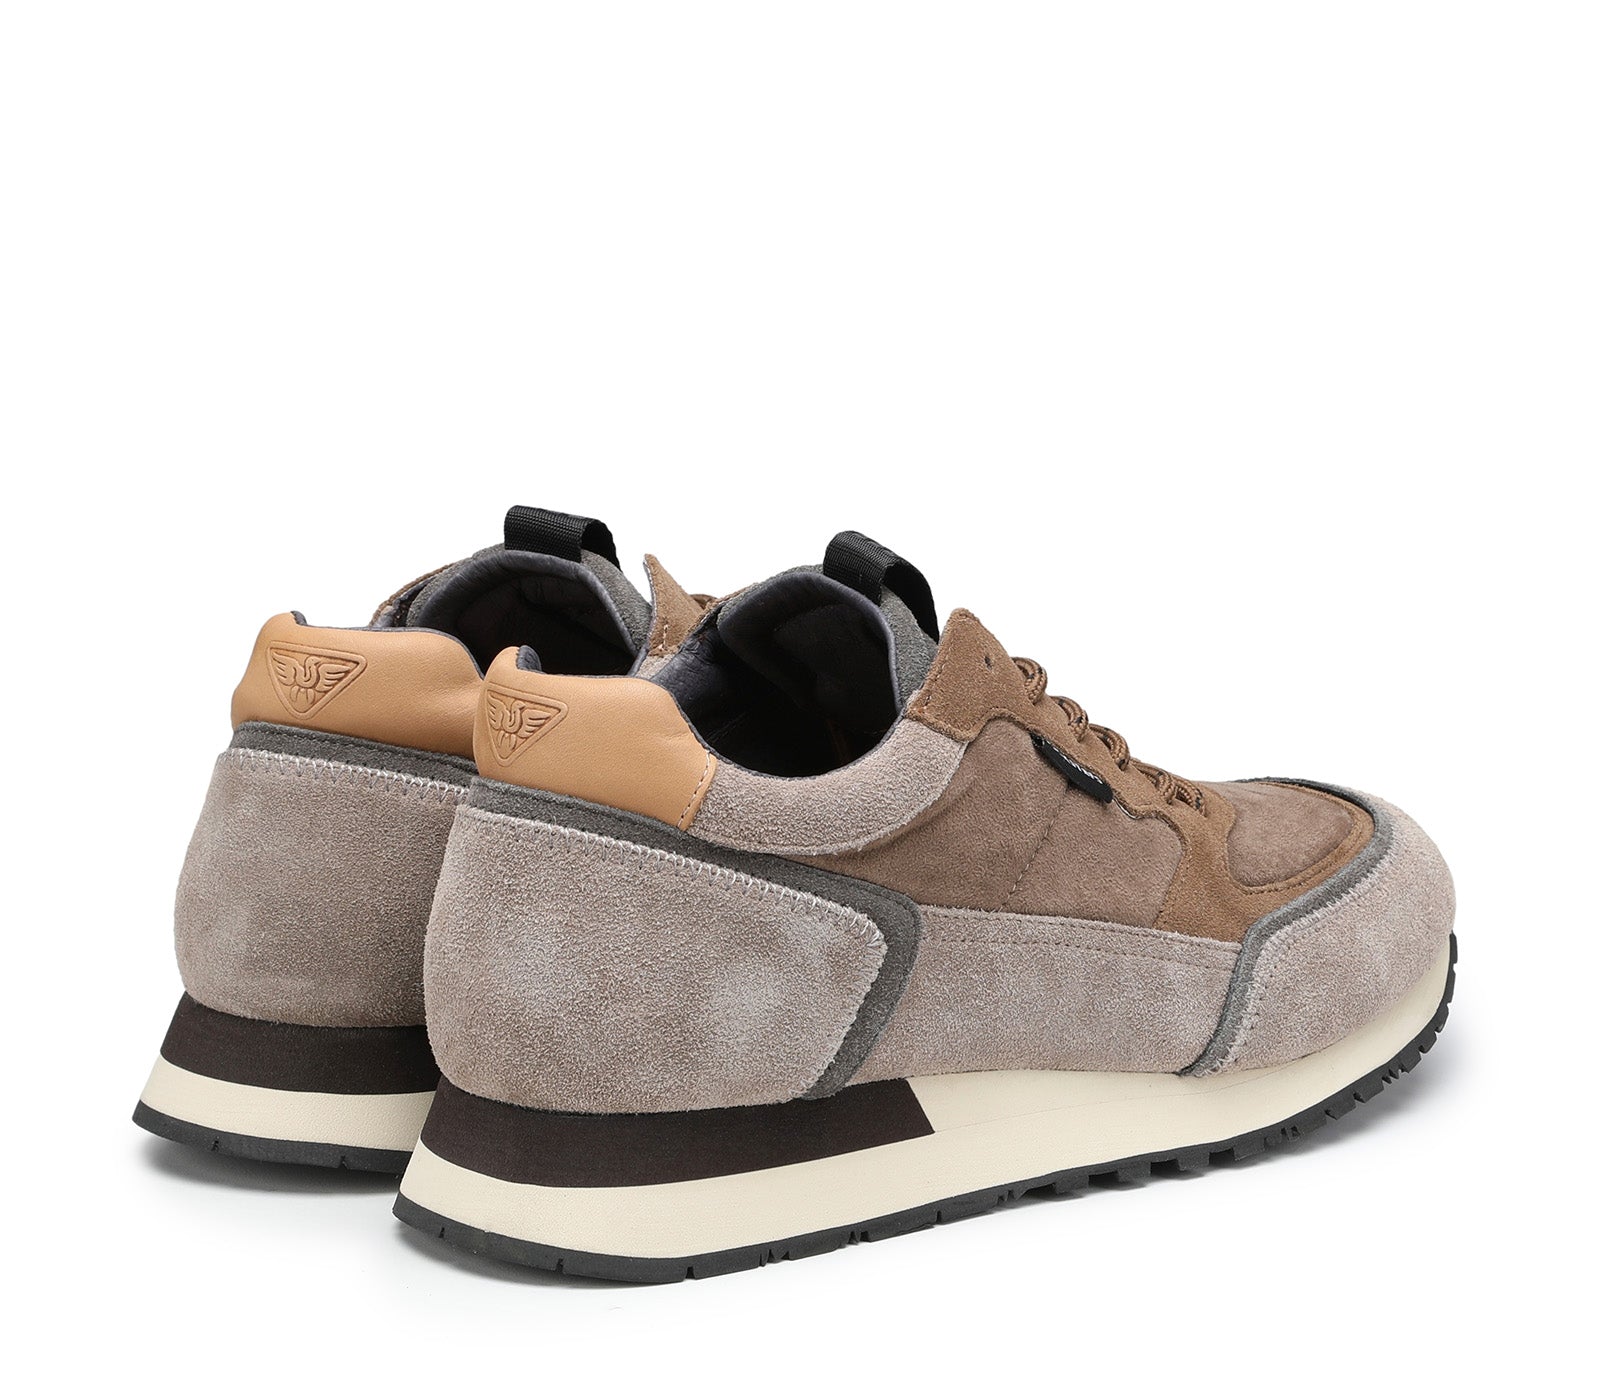 Men's Sneakers in Mixed Suede Leather Tobacco Color